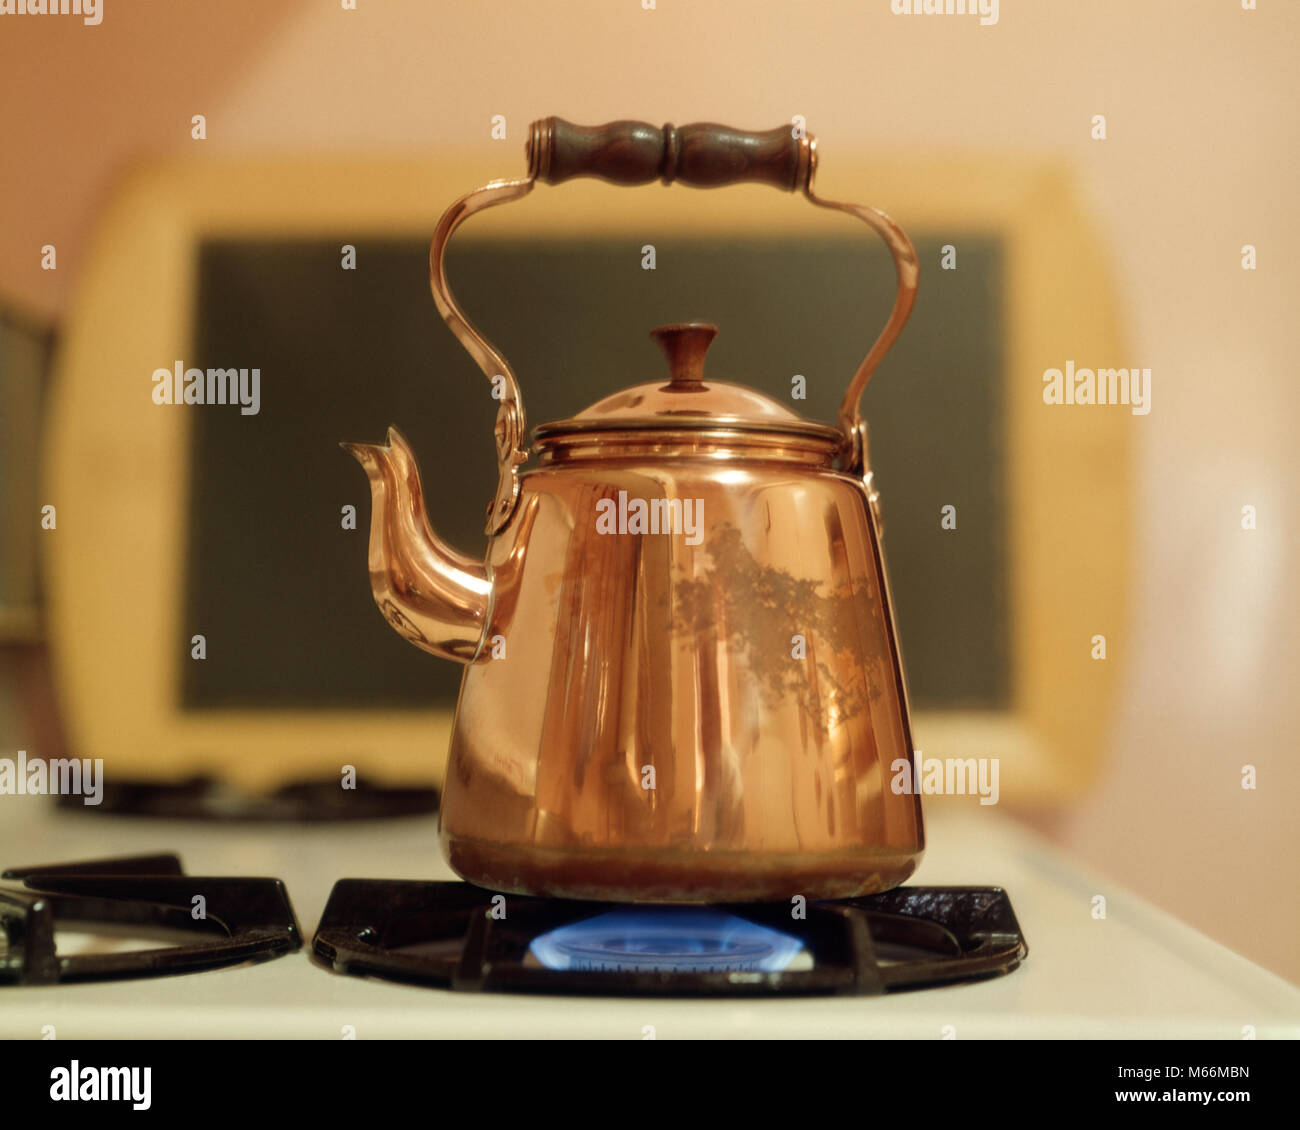 https://c8.alamy.com/comp/M66MBN/copper-tea-kettle-on-gas-flame-kh13267-cpc001-hars-old-fashioned-M66MBN.jpg